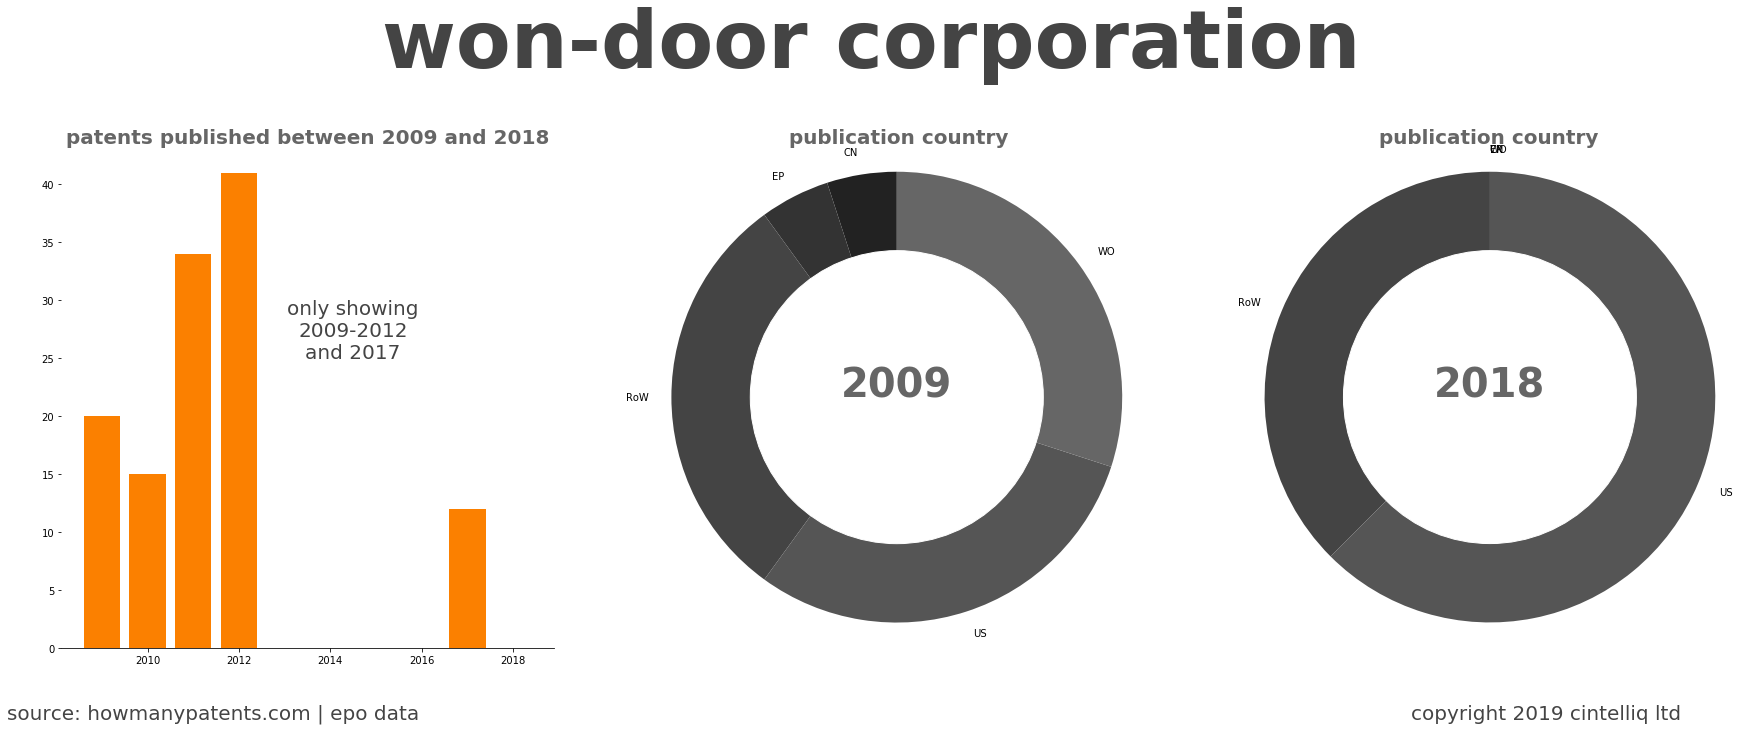 summary of patents for Won-Door Corporation